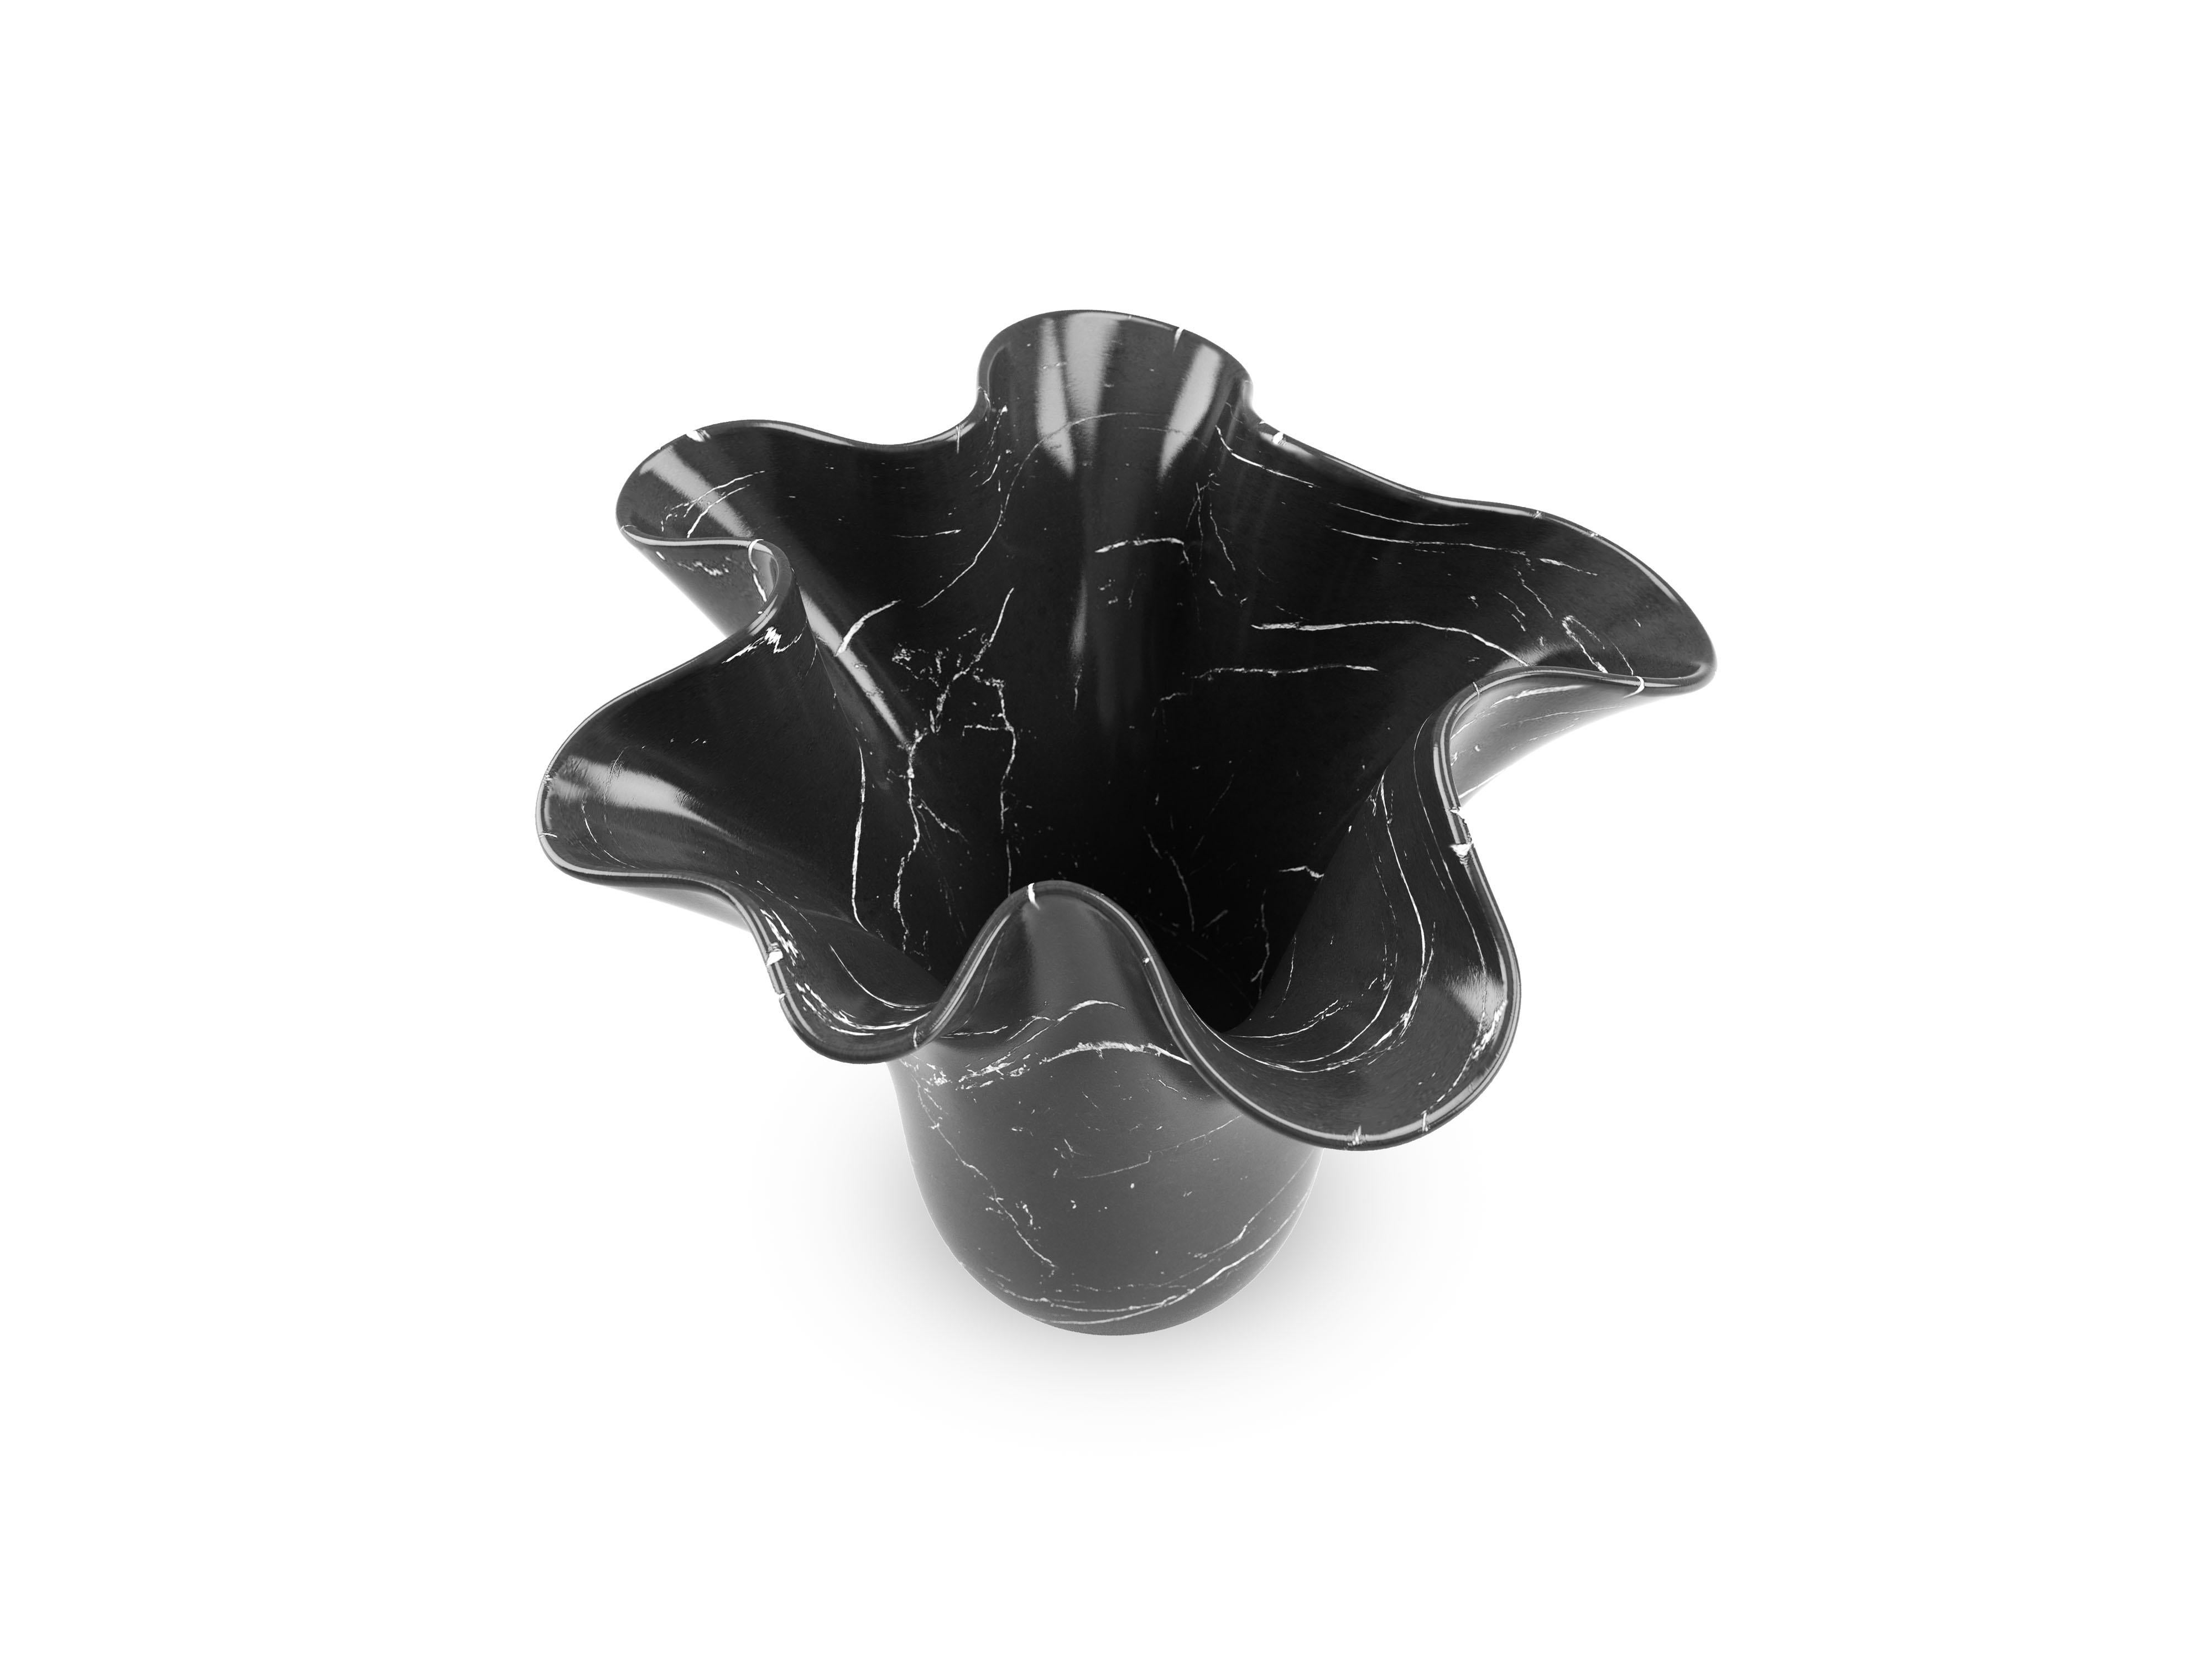 Sculptural vase carved by hand from a solid block of Marquina marble, polished finish. This vase reproduces, in a smaller version, the iconic sculptural vase PV05 designed by the Atelier Barberini & Gunnell, hand made in a limited edition for the